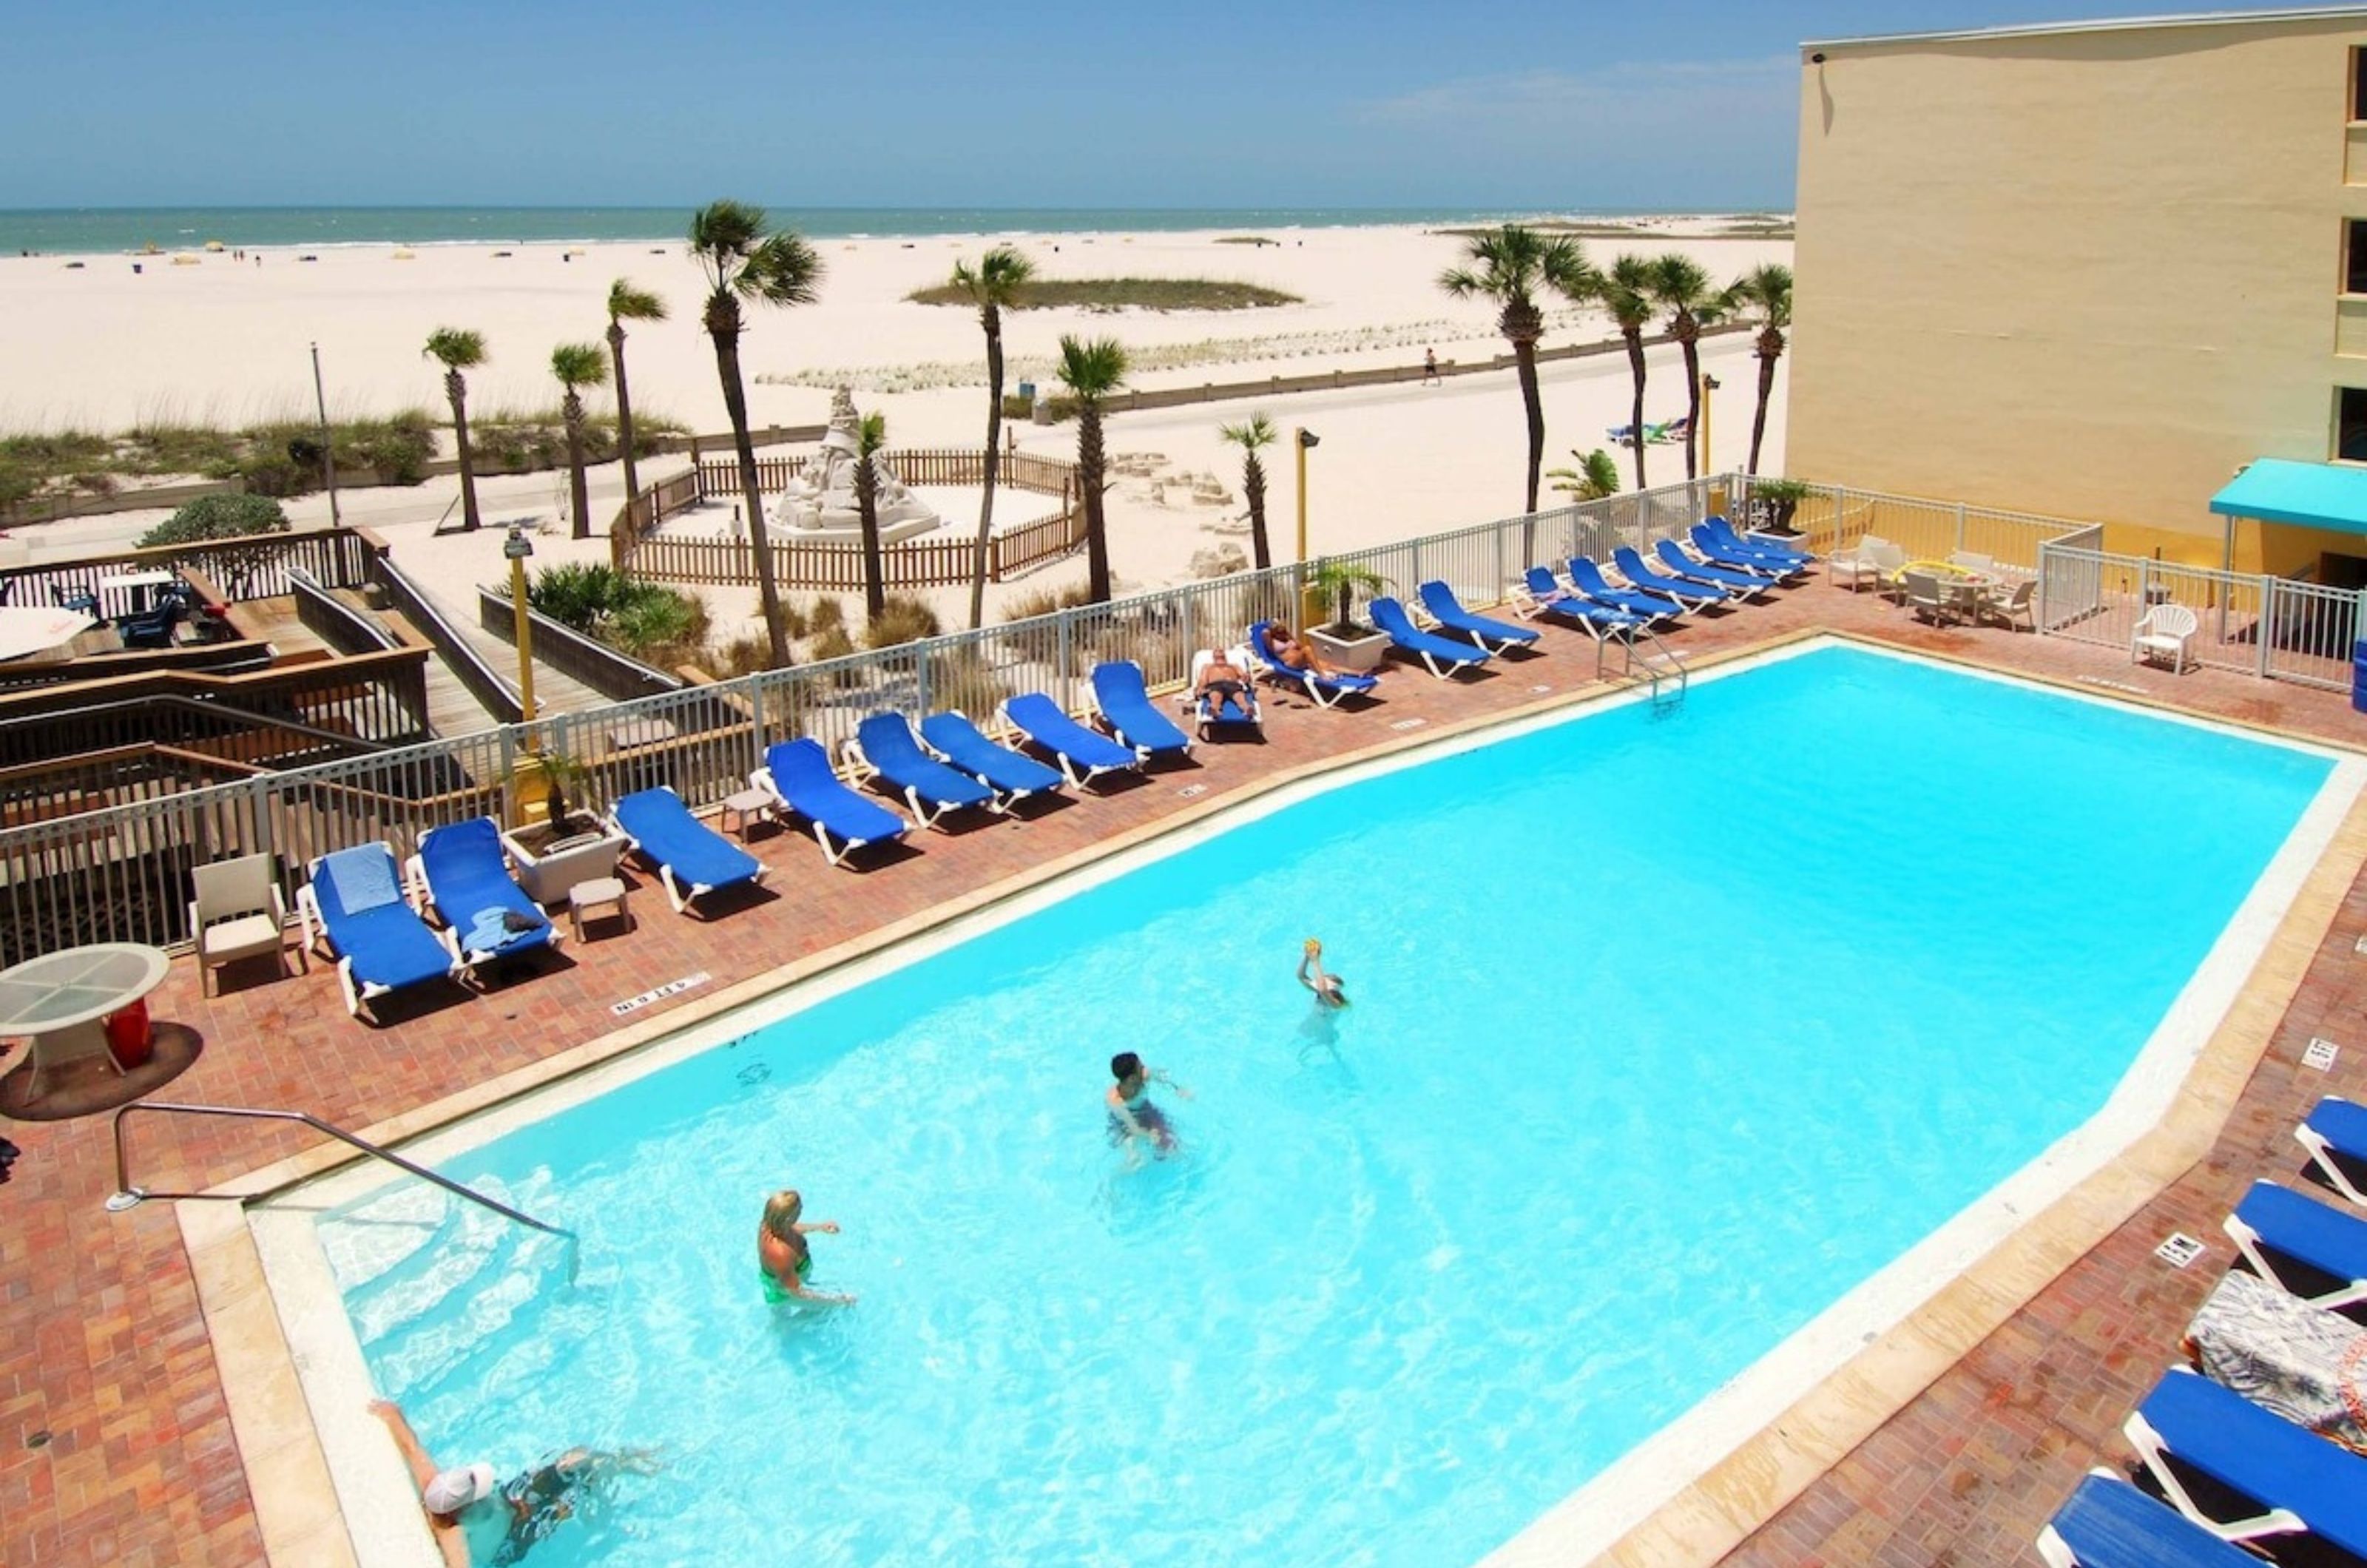 Guests swimming in one of two outdoor swimming pools at Bilmar Beach Resort in St. Pete Beach Florida 